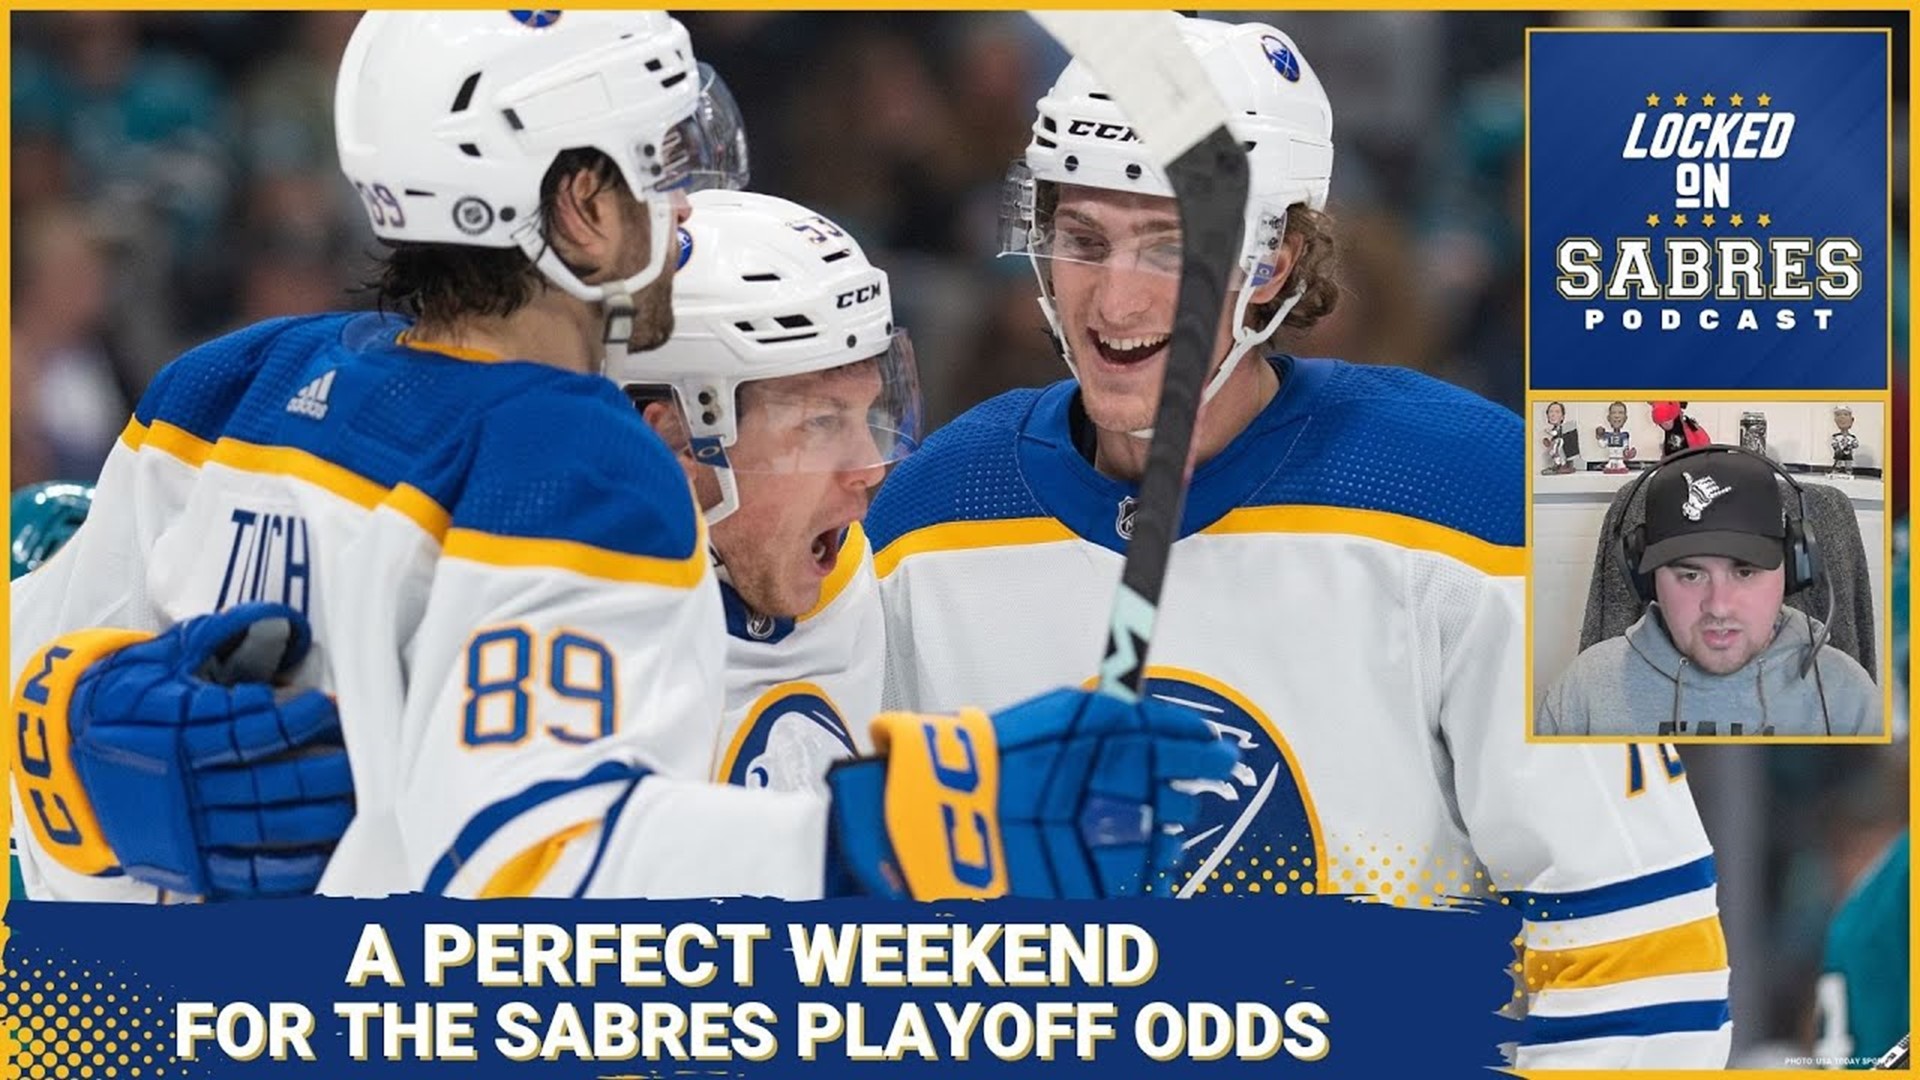 A perfect weekend for the Sabres playoff odds